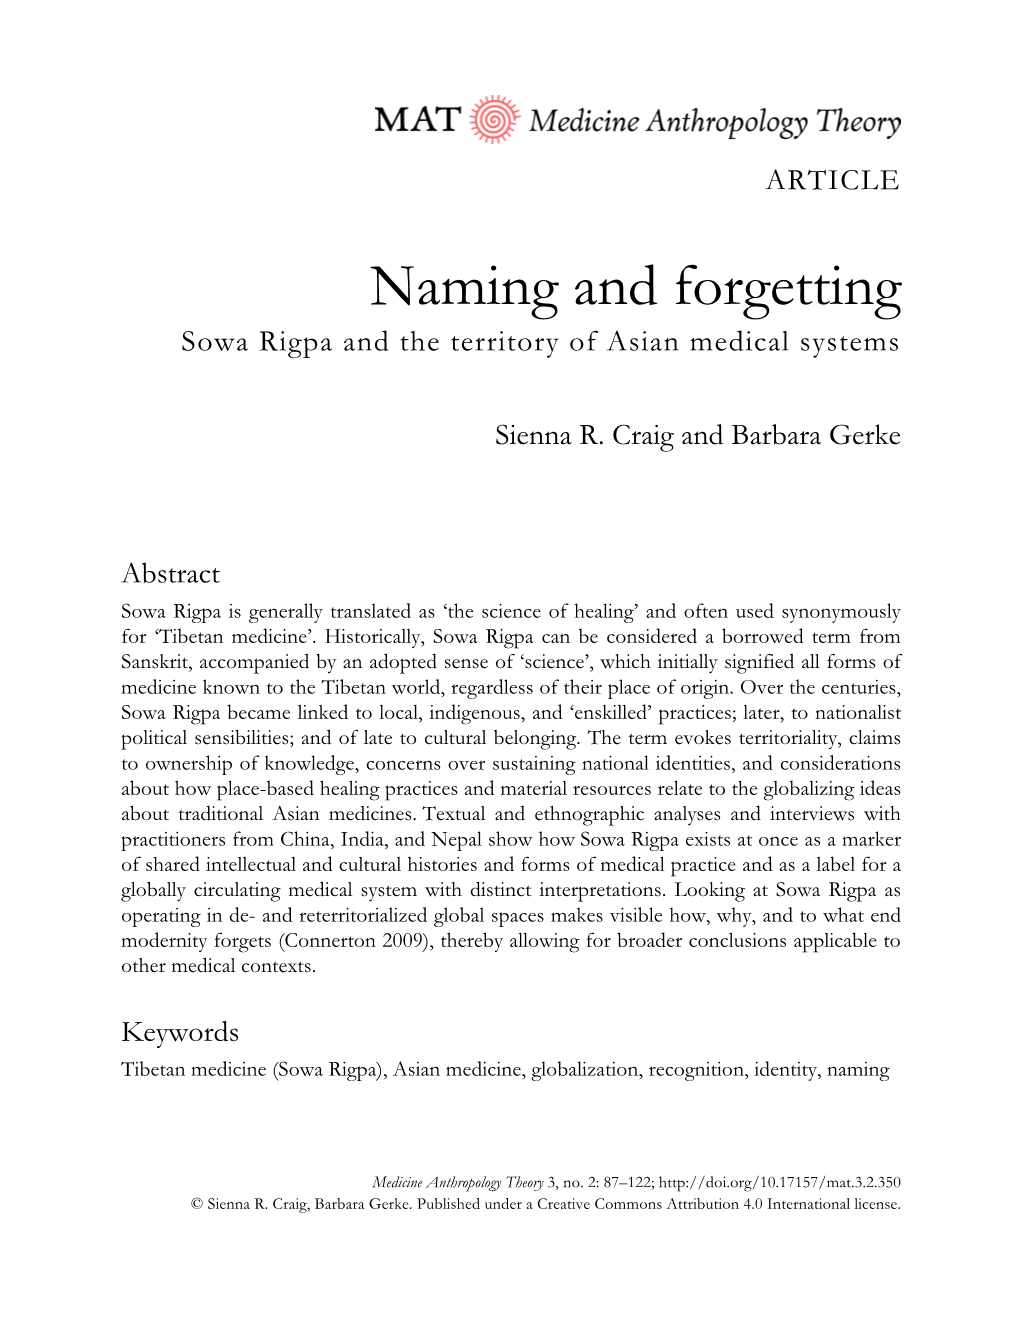 Naming and Forgetting Sowa Rigpa and the Territory of Asian Medical Systems